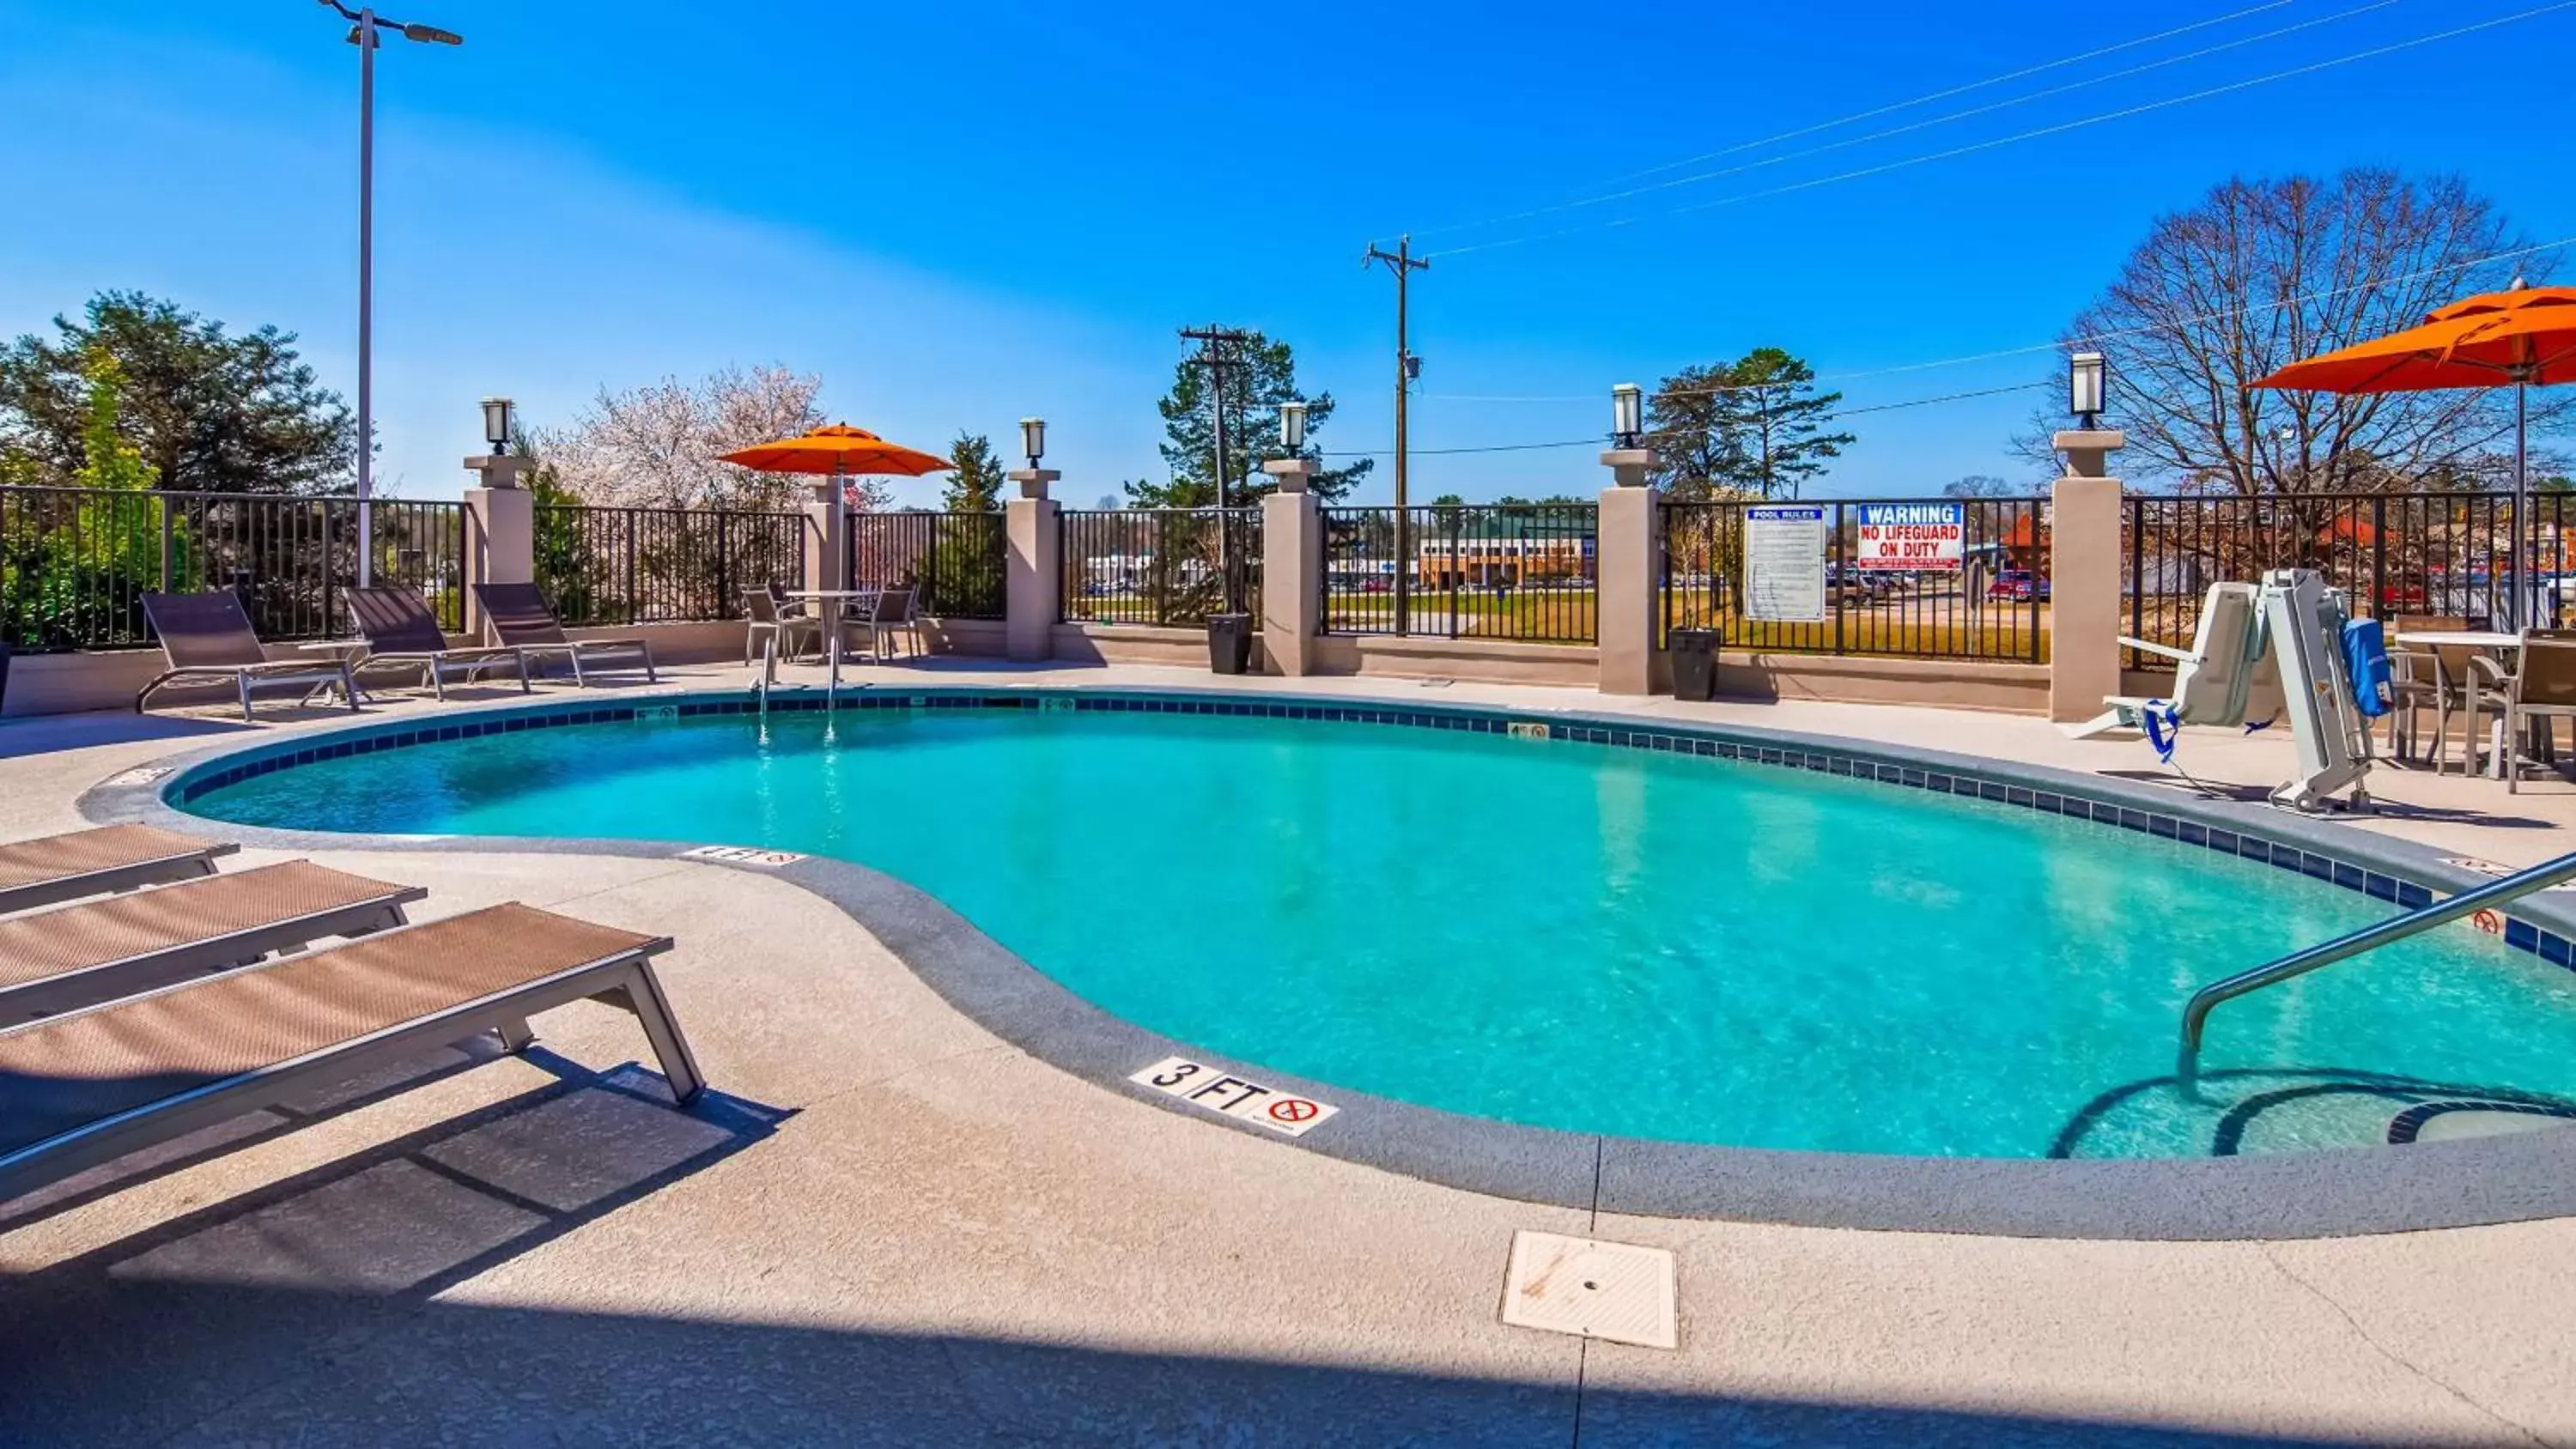 On site, Swimming Pool in Best Western Travelers Rest/Greenville